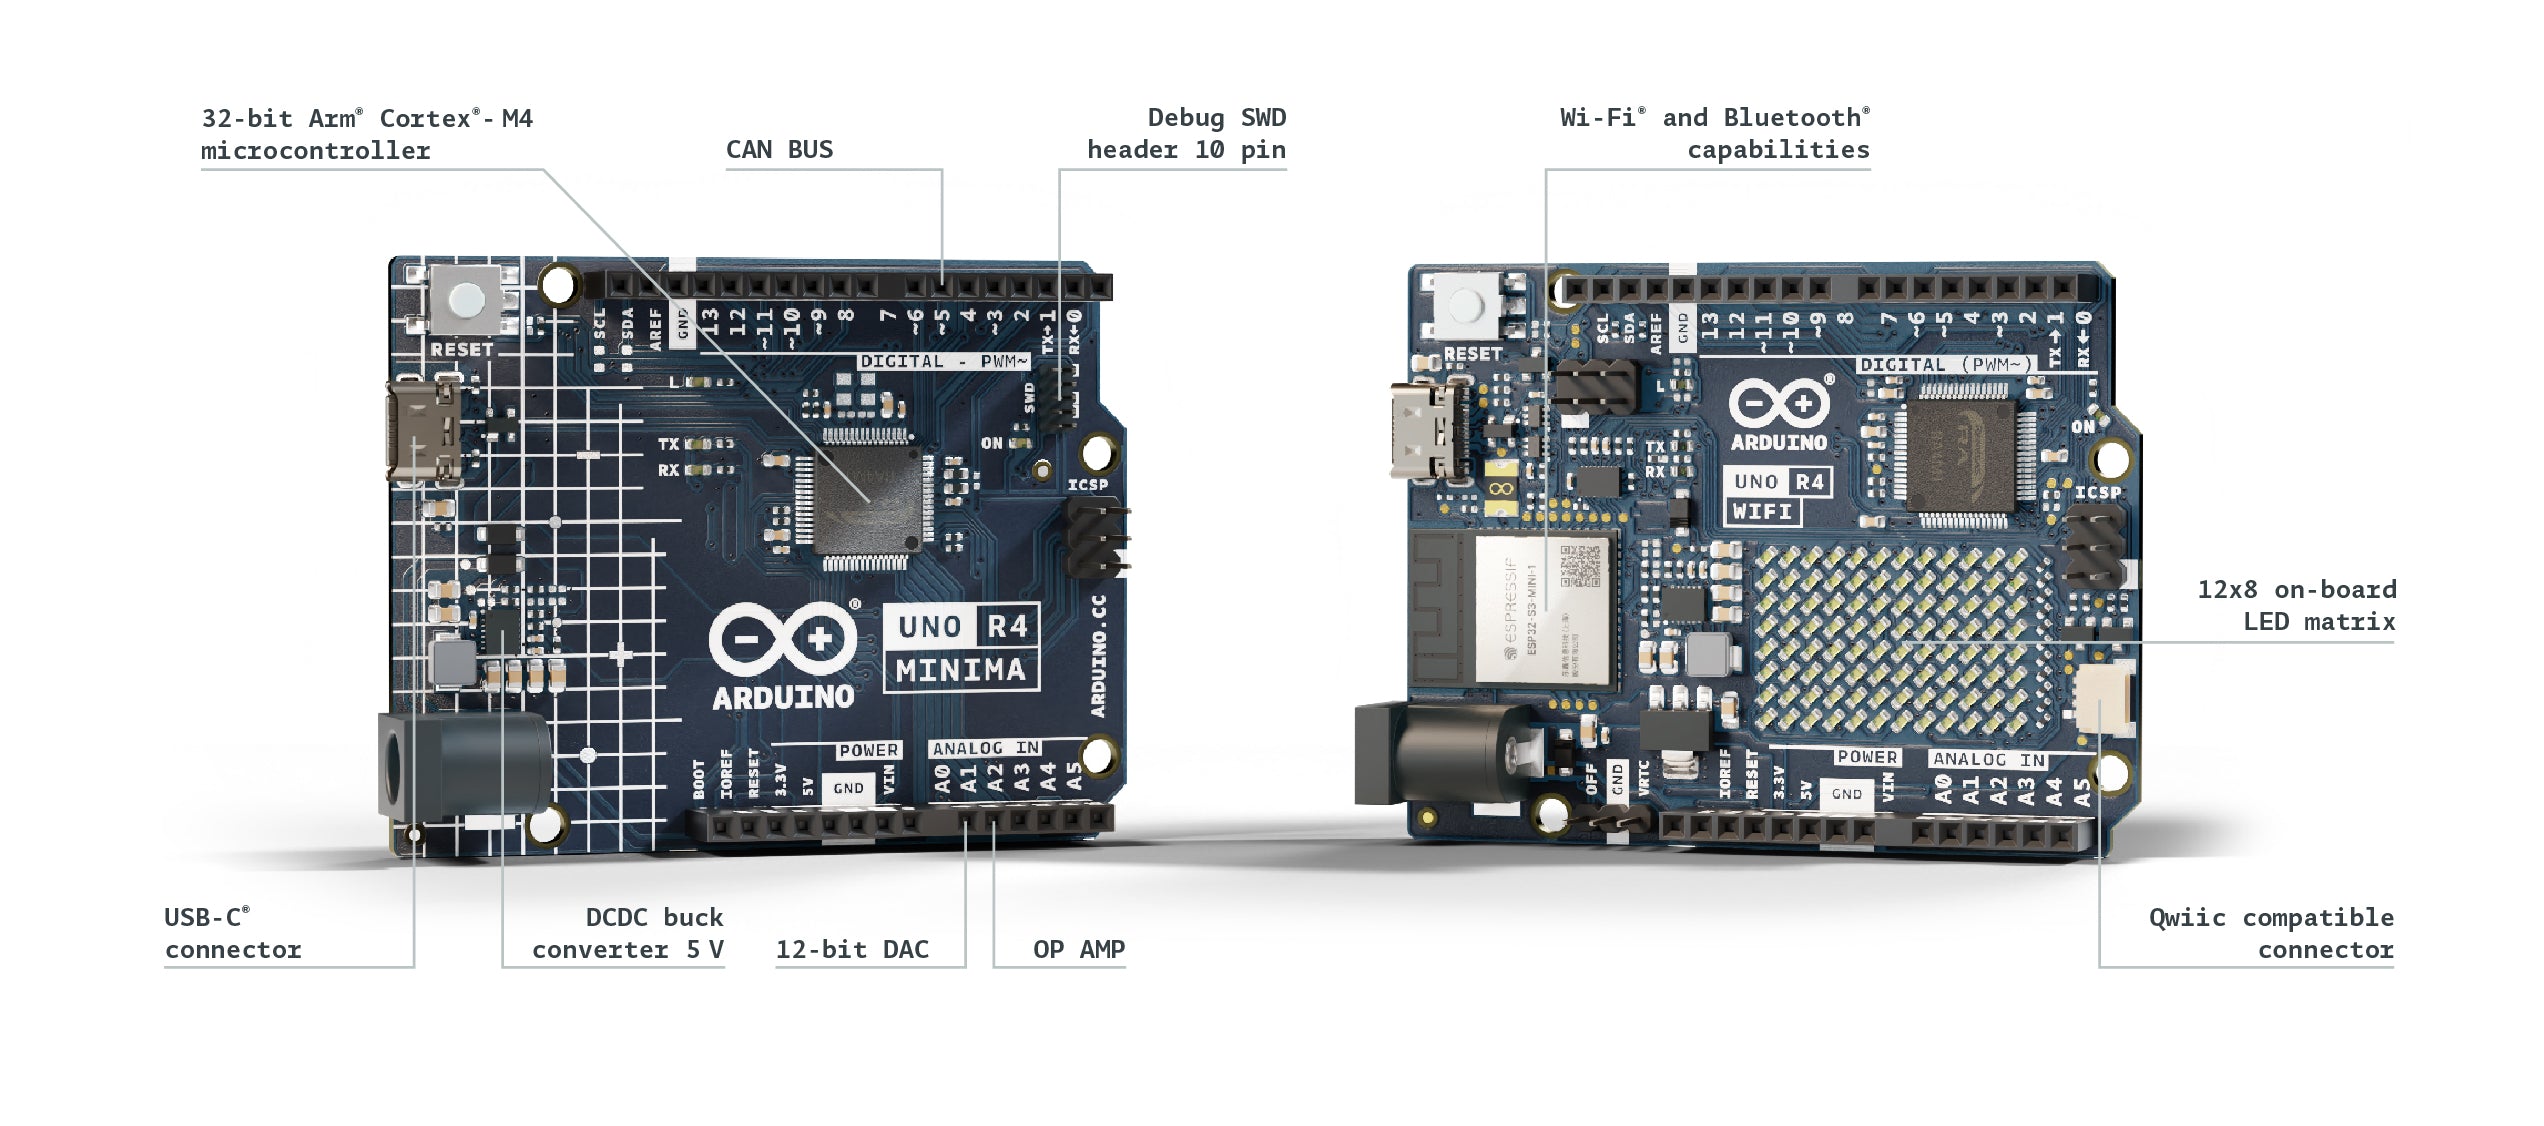 Getting started with your Arduino UNO R4 Minima